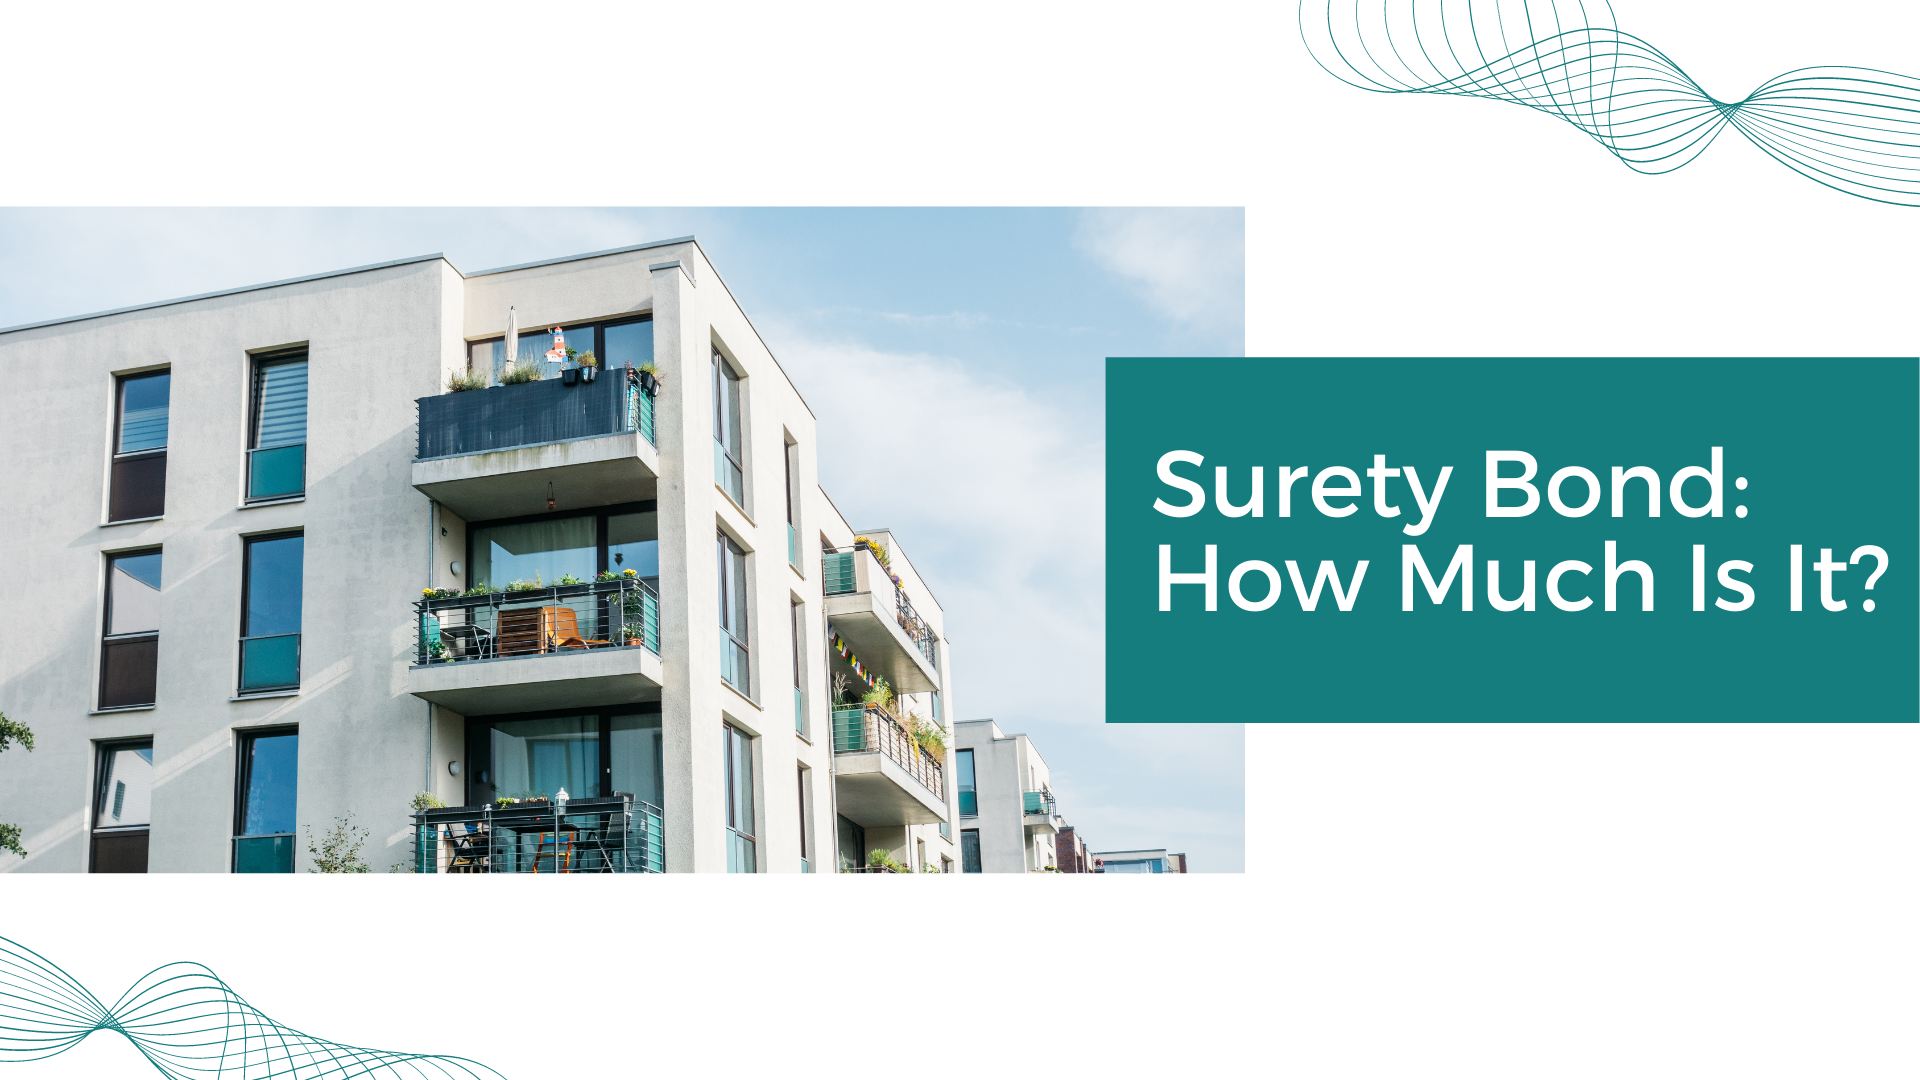 surety bond - What is the cost of a surety bond - modern building with glass windows